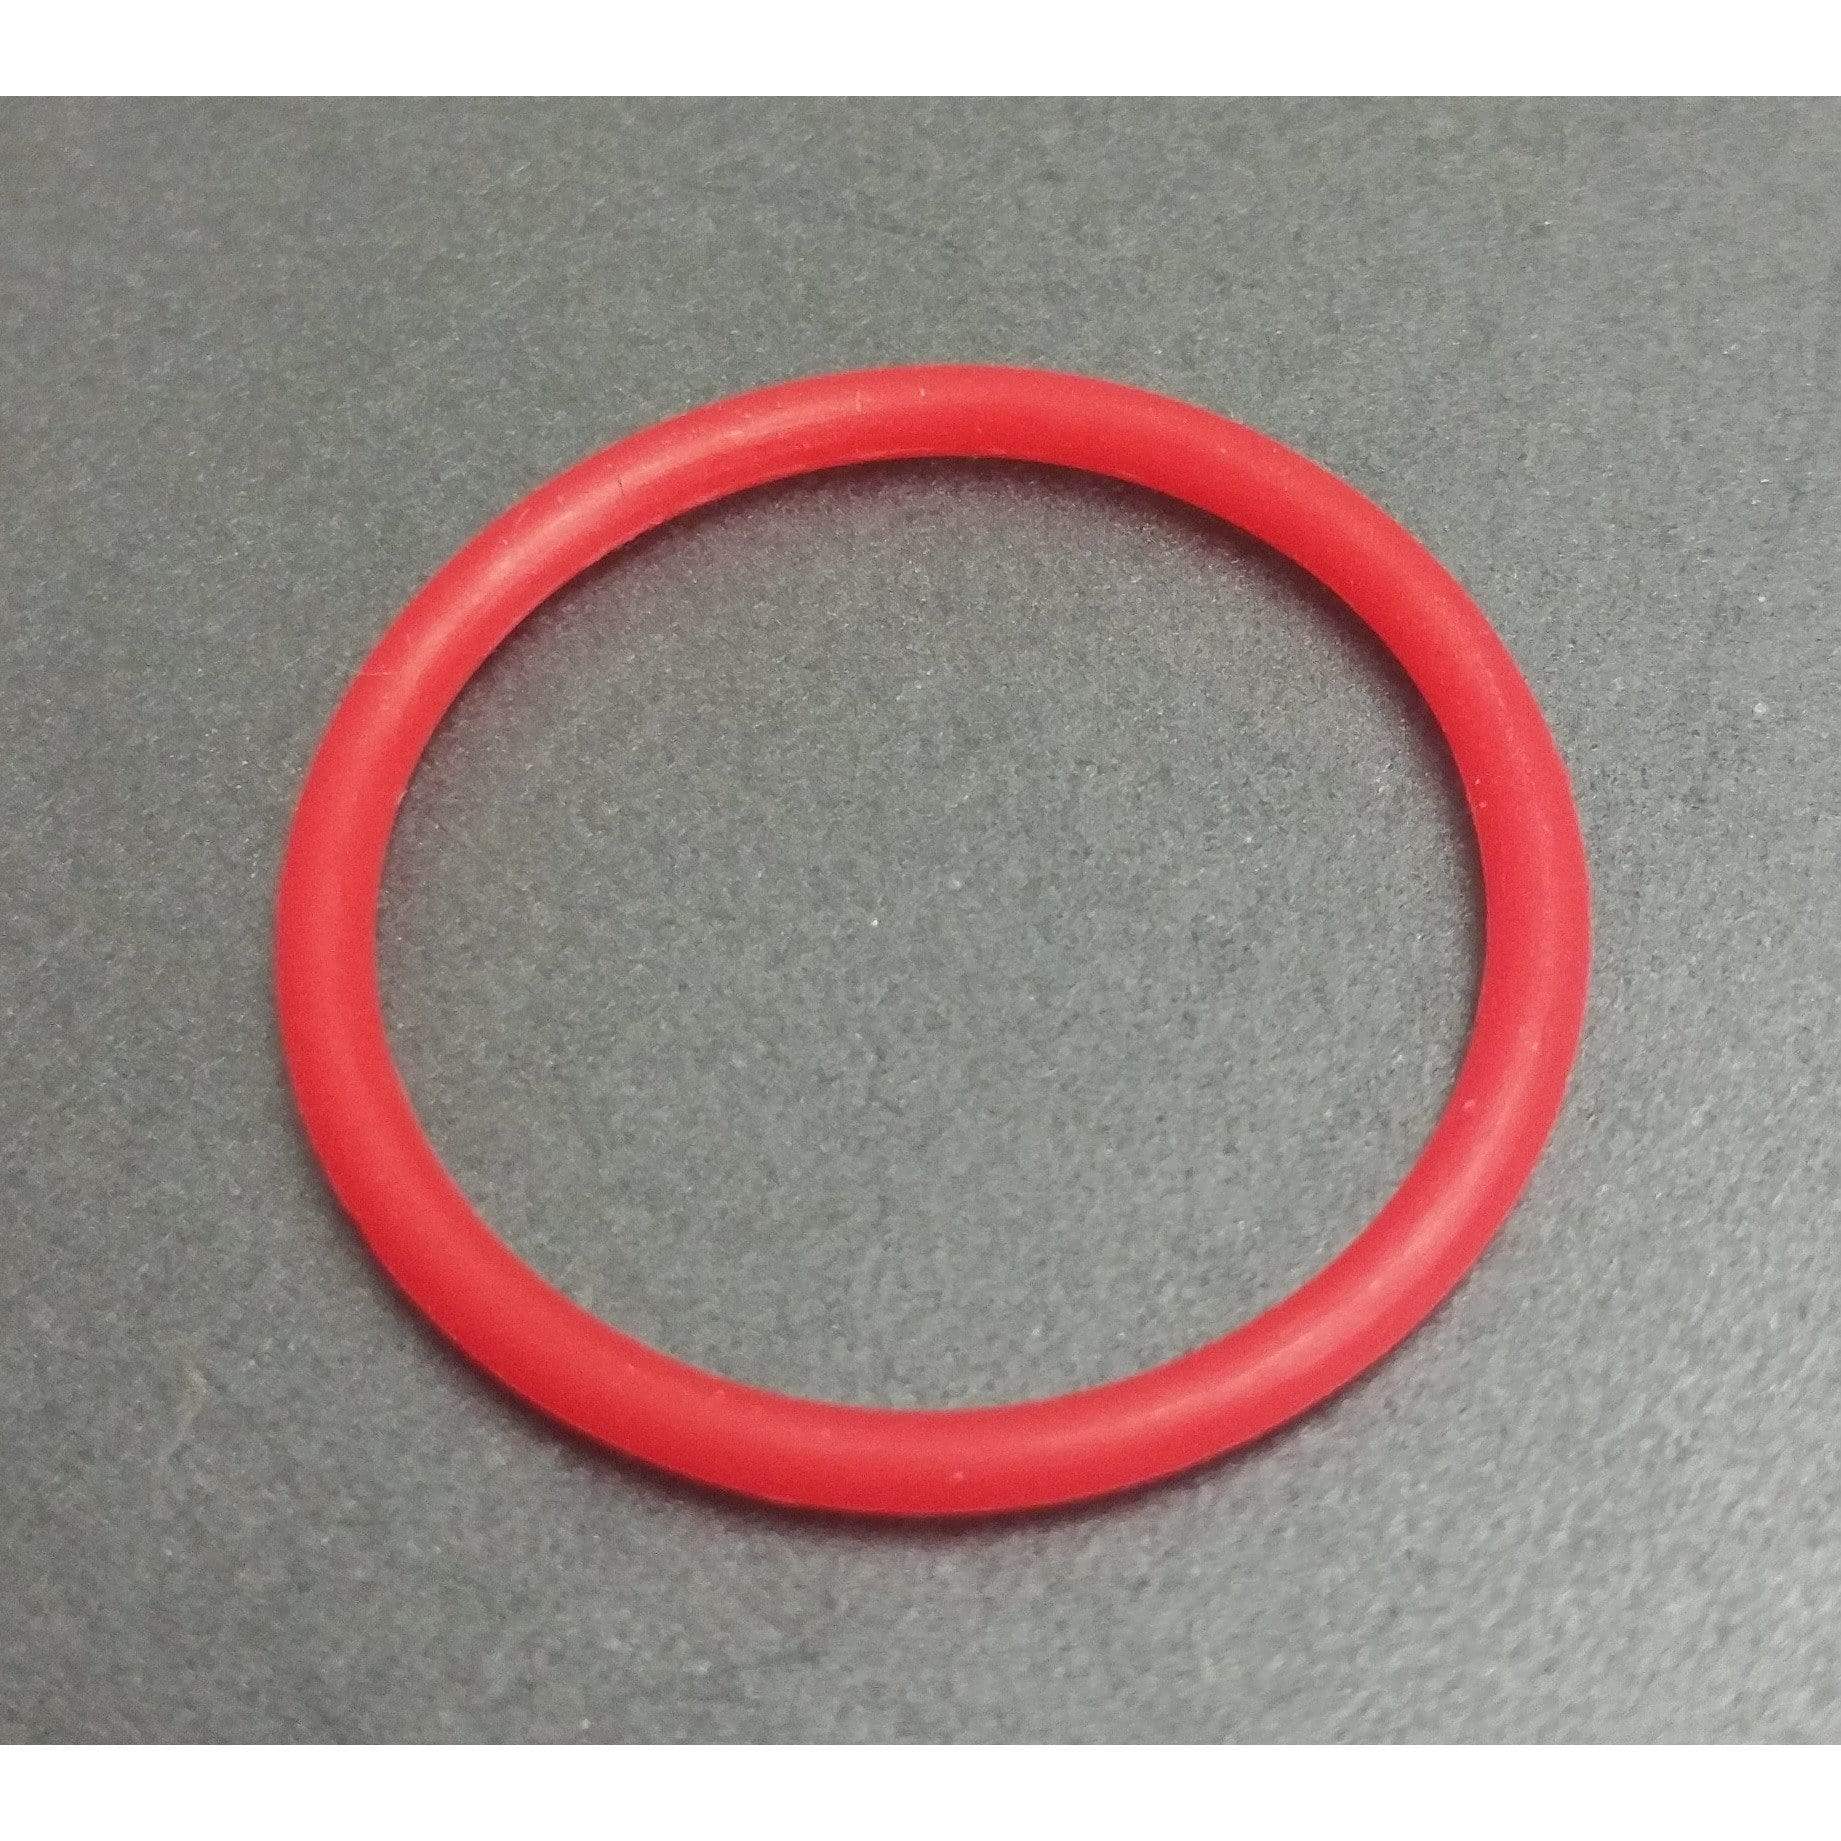 TFV8 Replacement Seals Top Glass Oring Red Seals/Oring's